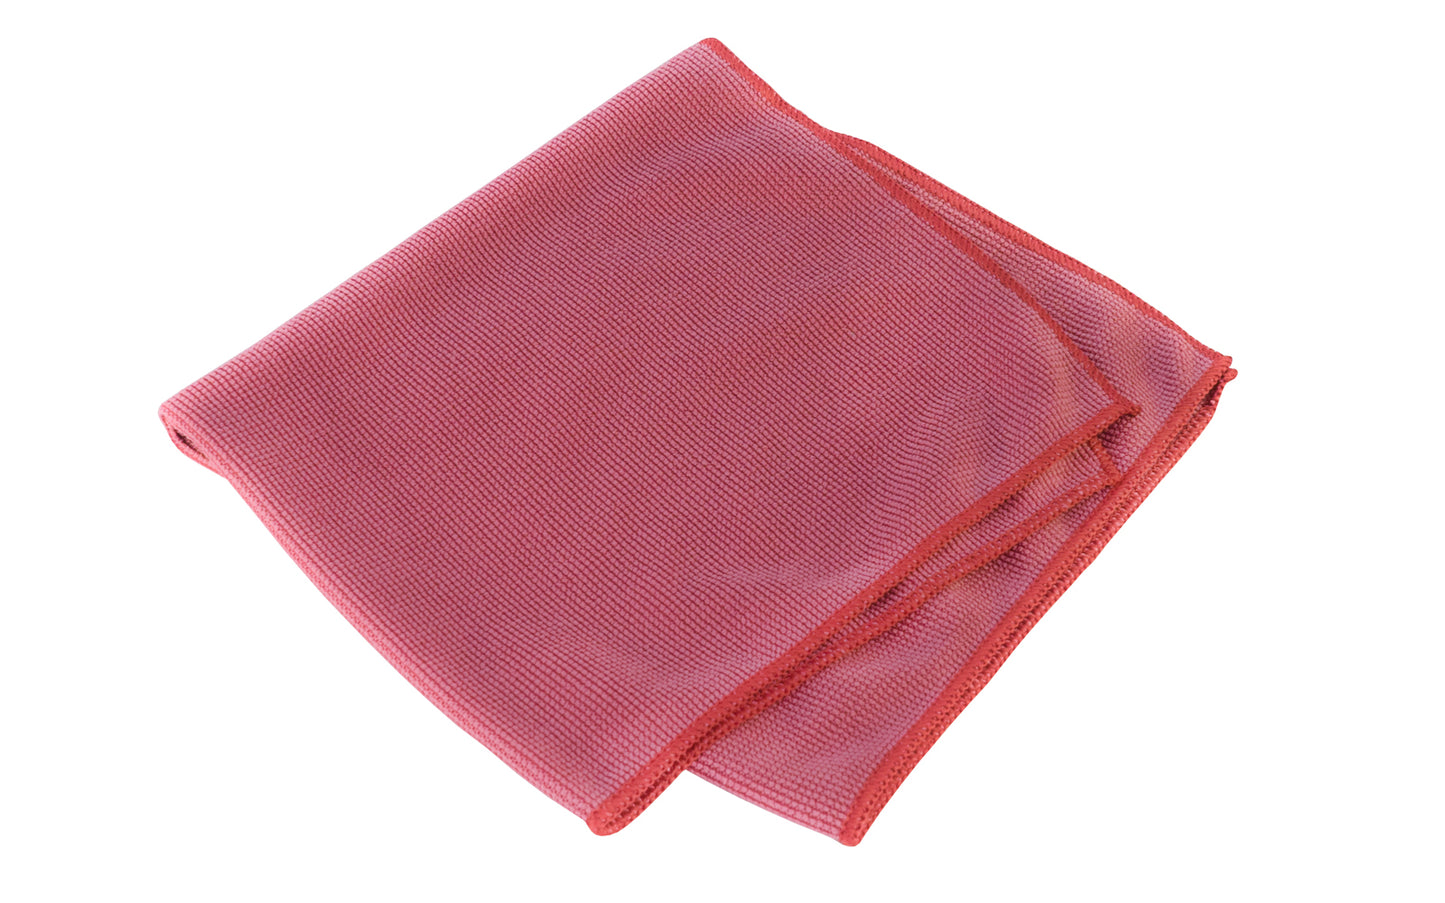 Norton 16" x 16" Micro Fiber Cloth - Dry Tack (Red). Attracts & traps smallest particles - Hypo allergenic. Washable & reusable. 70% polyester / 30% polyamide.   Made by Norton Abrasives, St. Gobain. Model No. 04025.